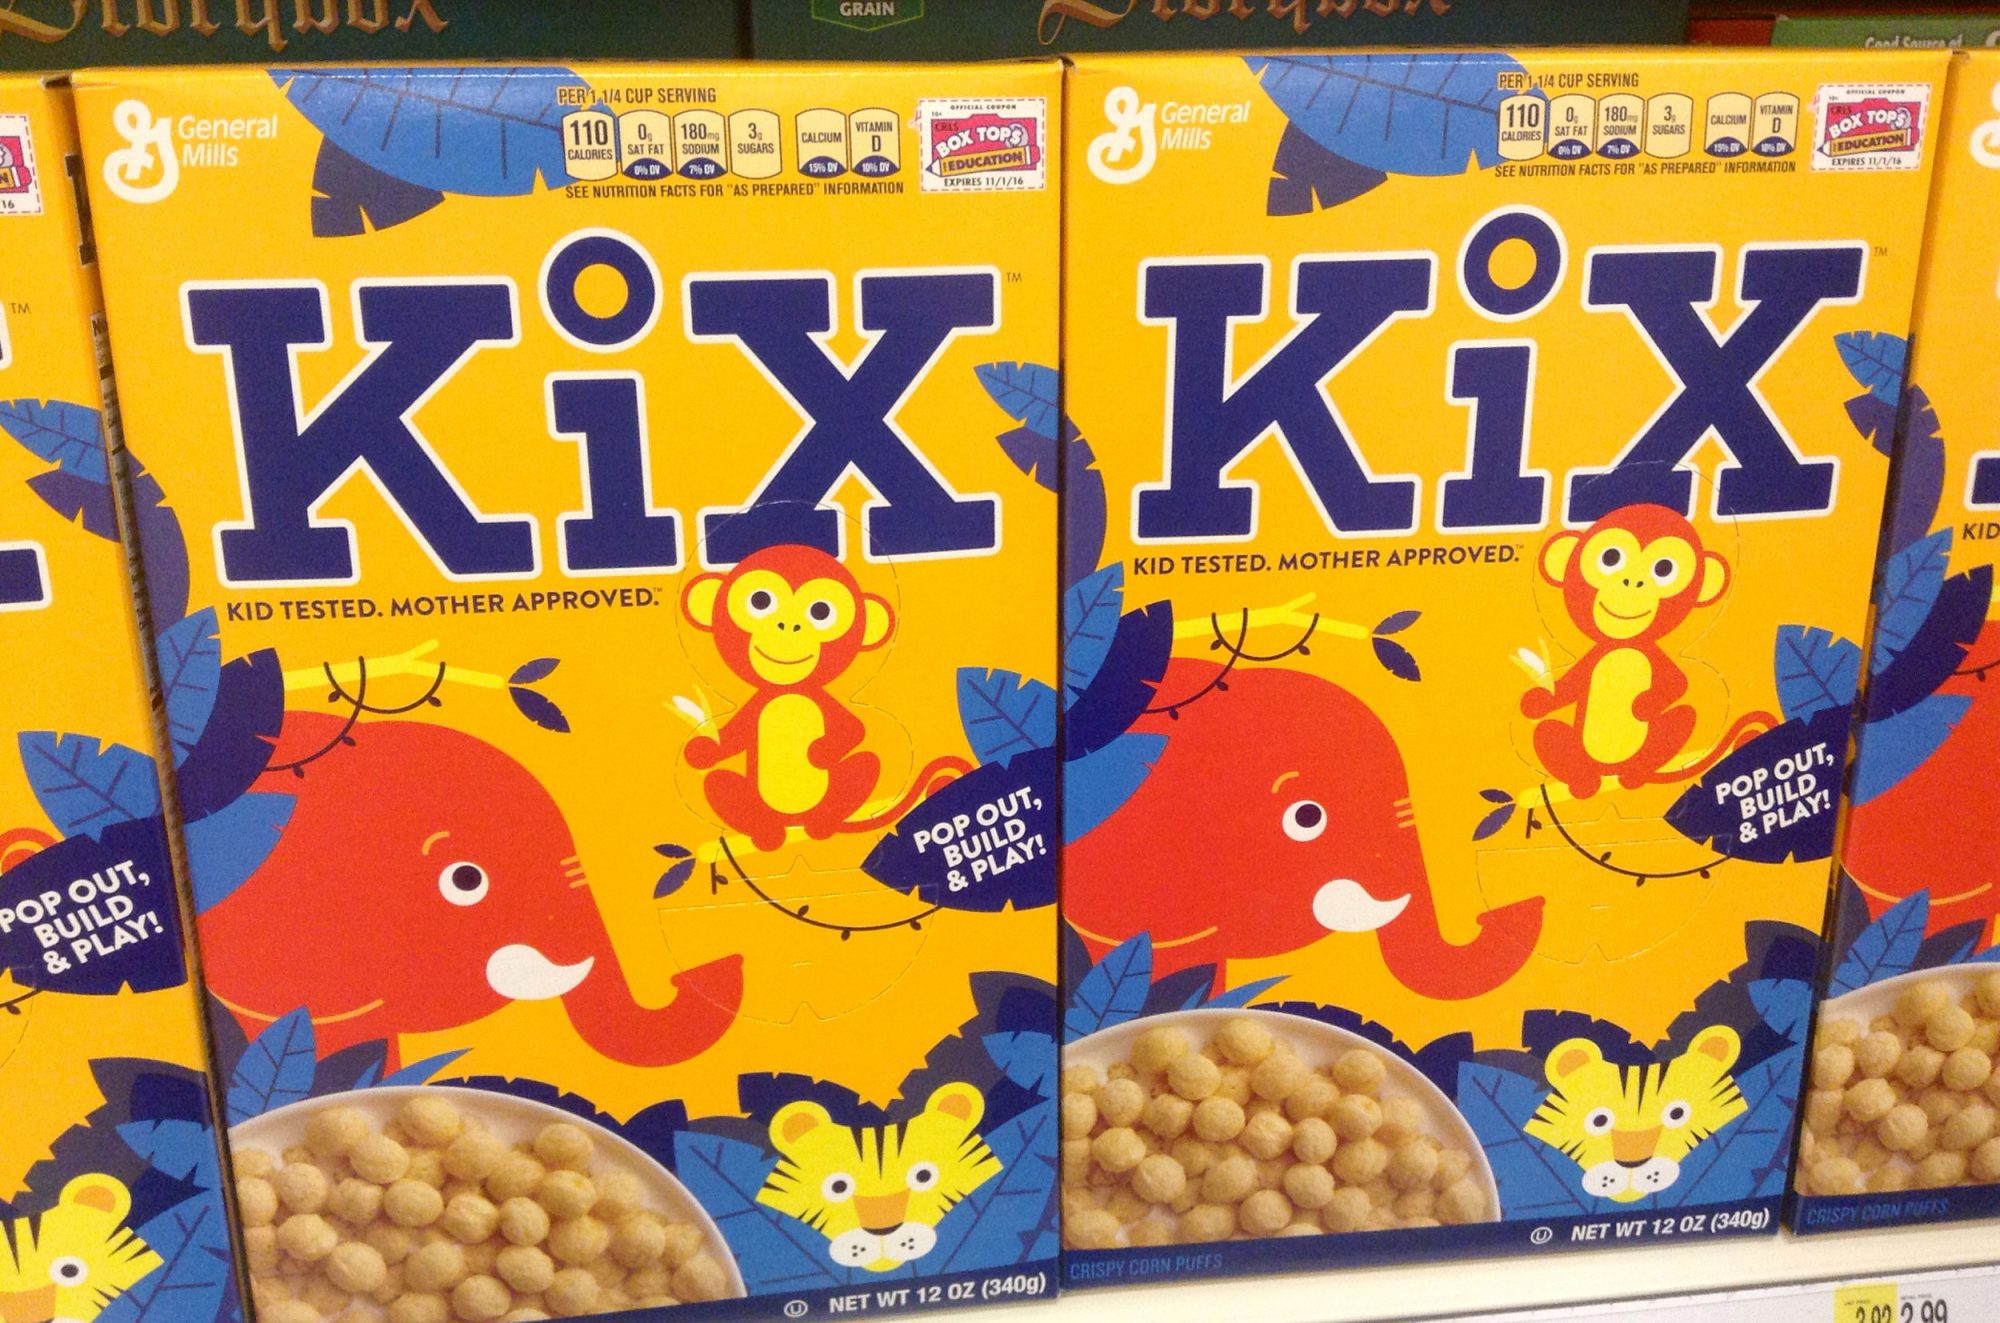 EC: Kix Is the Best Grown-Up Cereal That's Meant for Kids